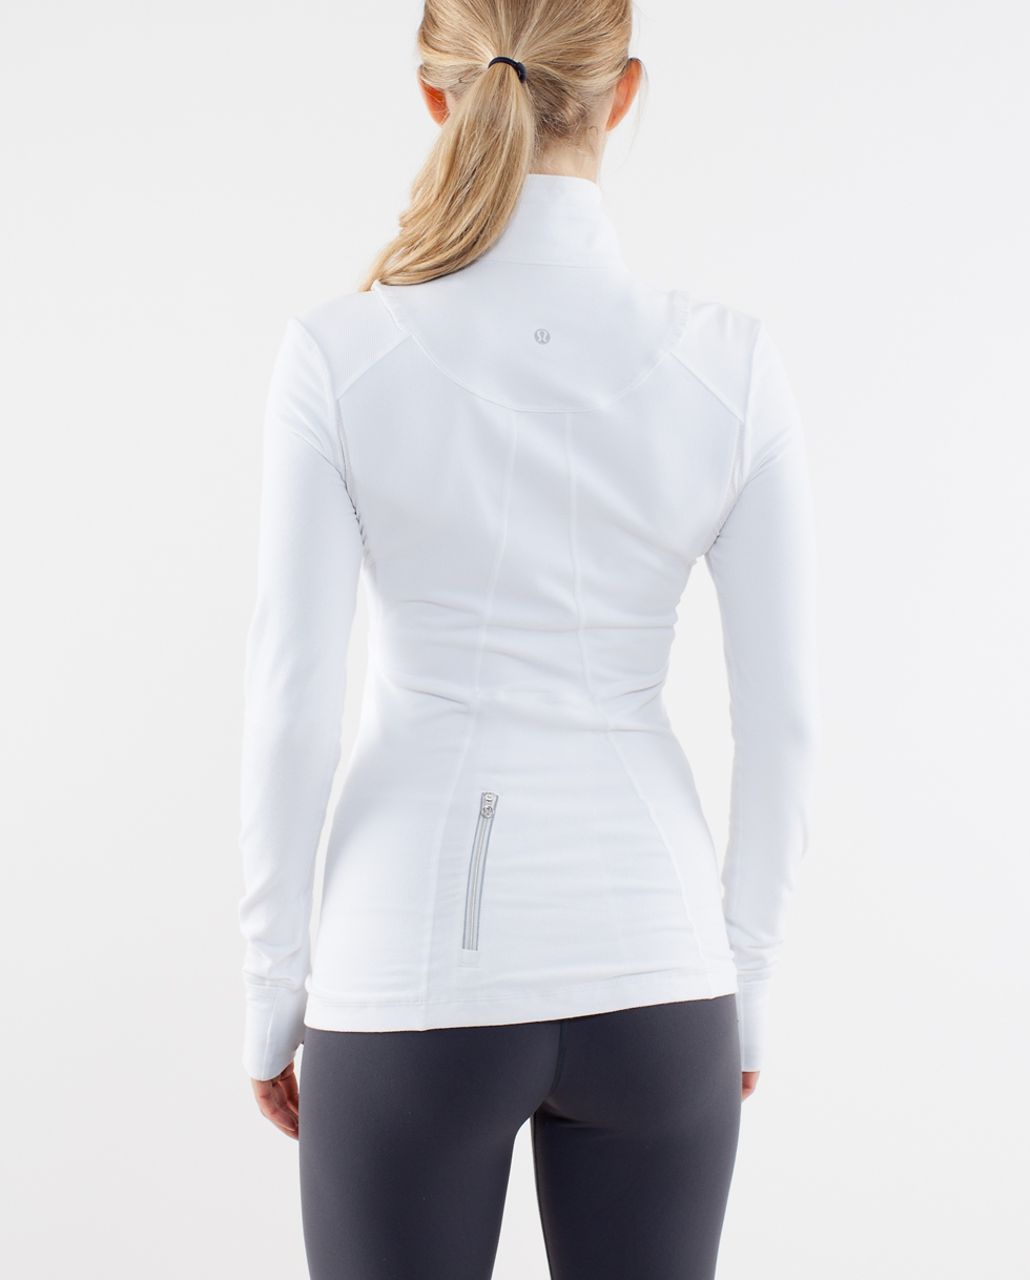 Lululemon Run:  Your Heart Out Pullover - White